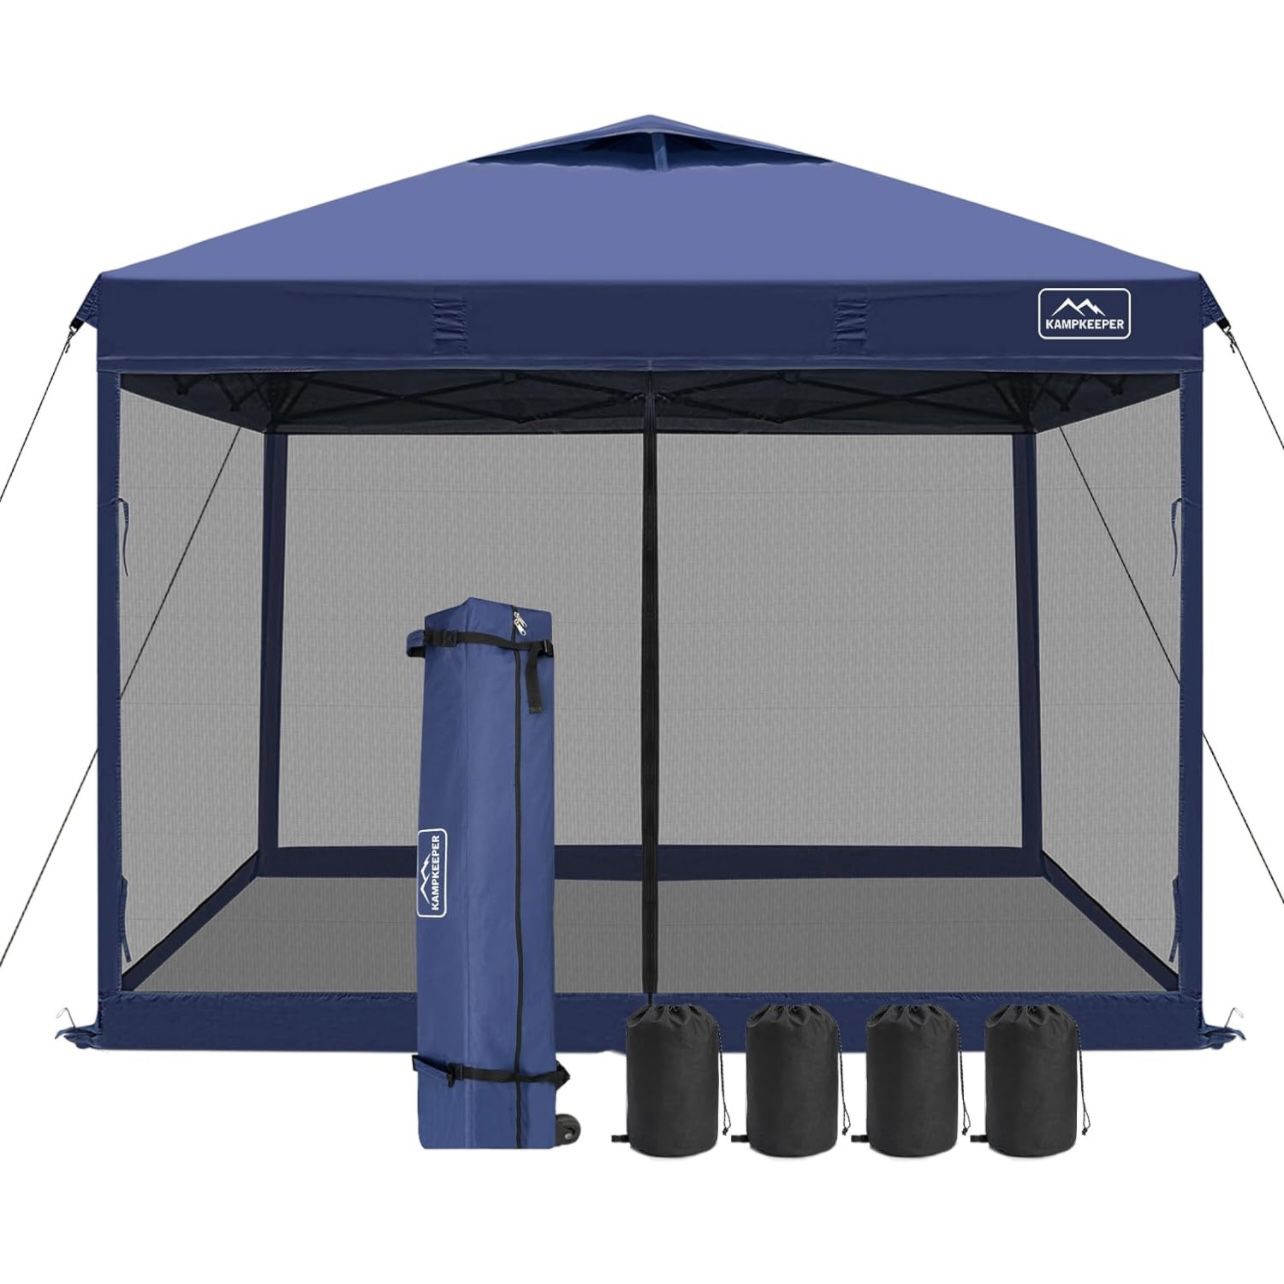 KAMPKEEPER 10'x10' Outdoor Pop Up Canopy Tent with Mesh Side Walls